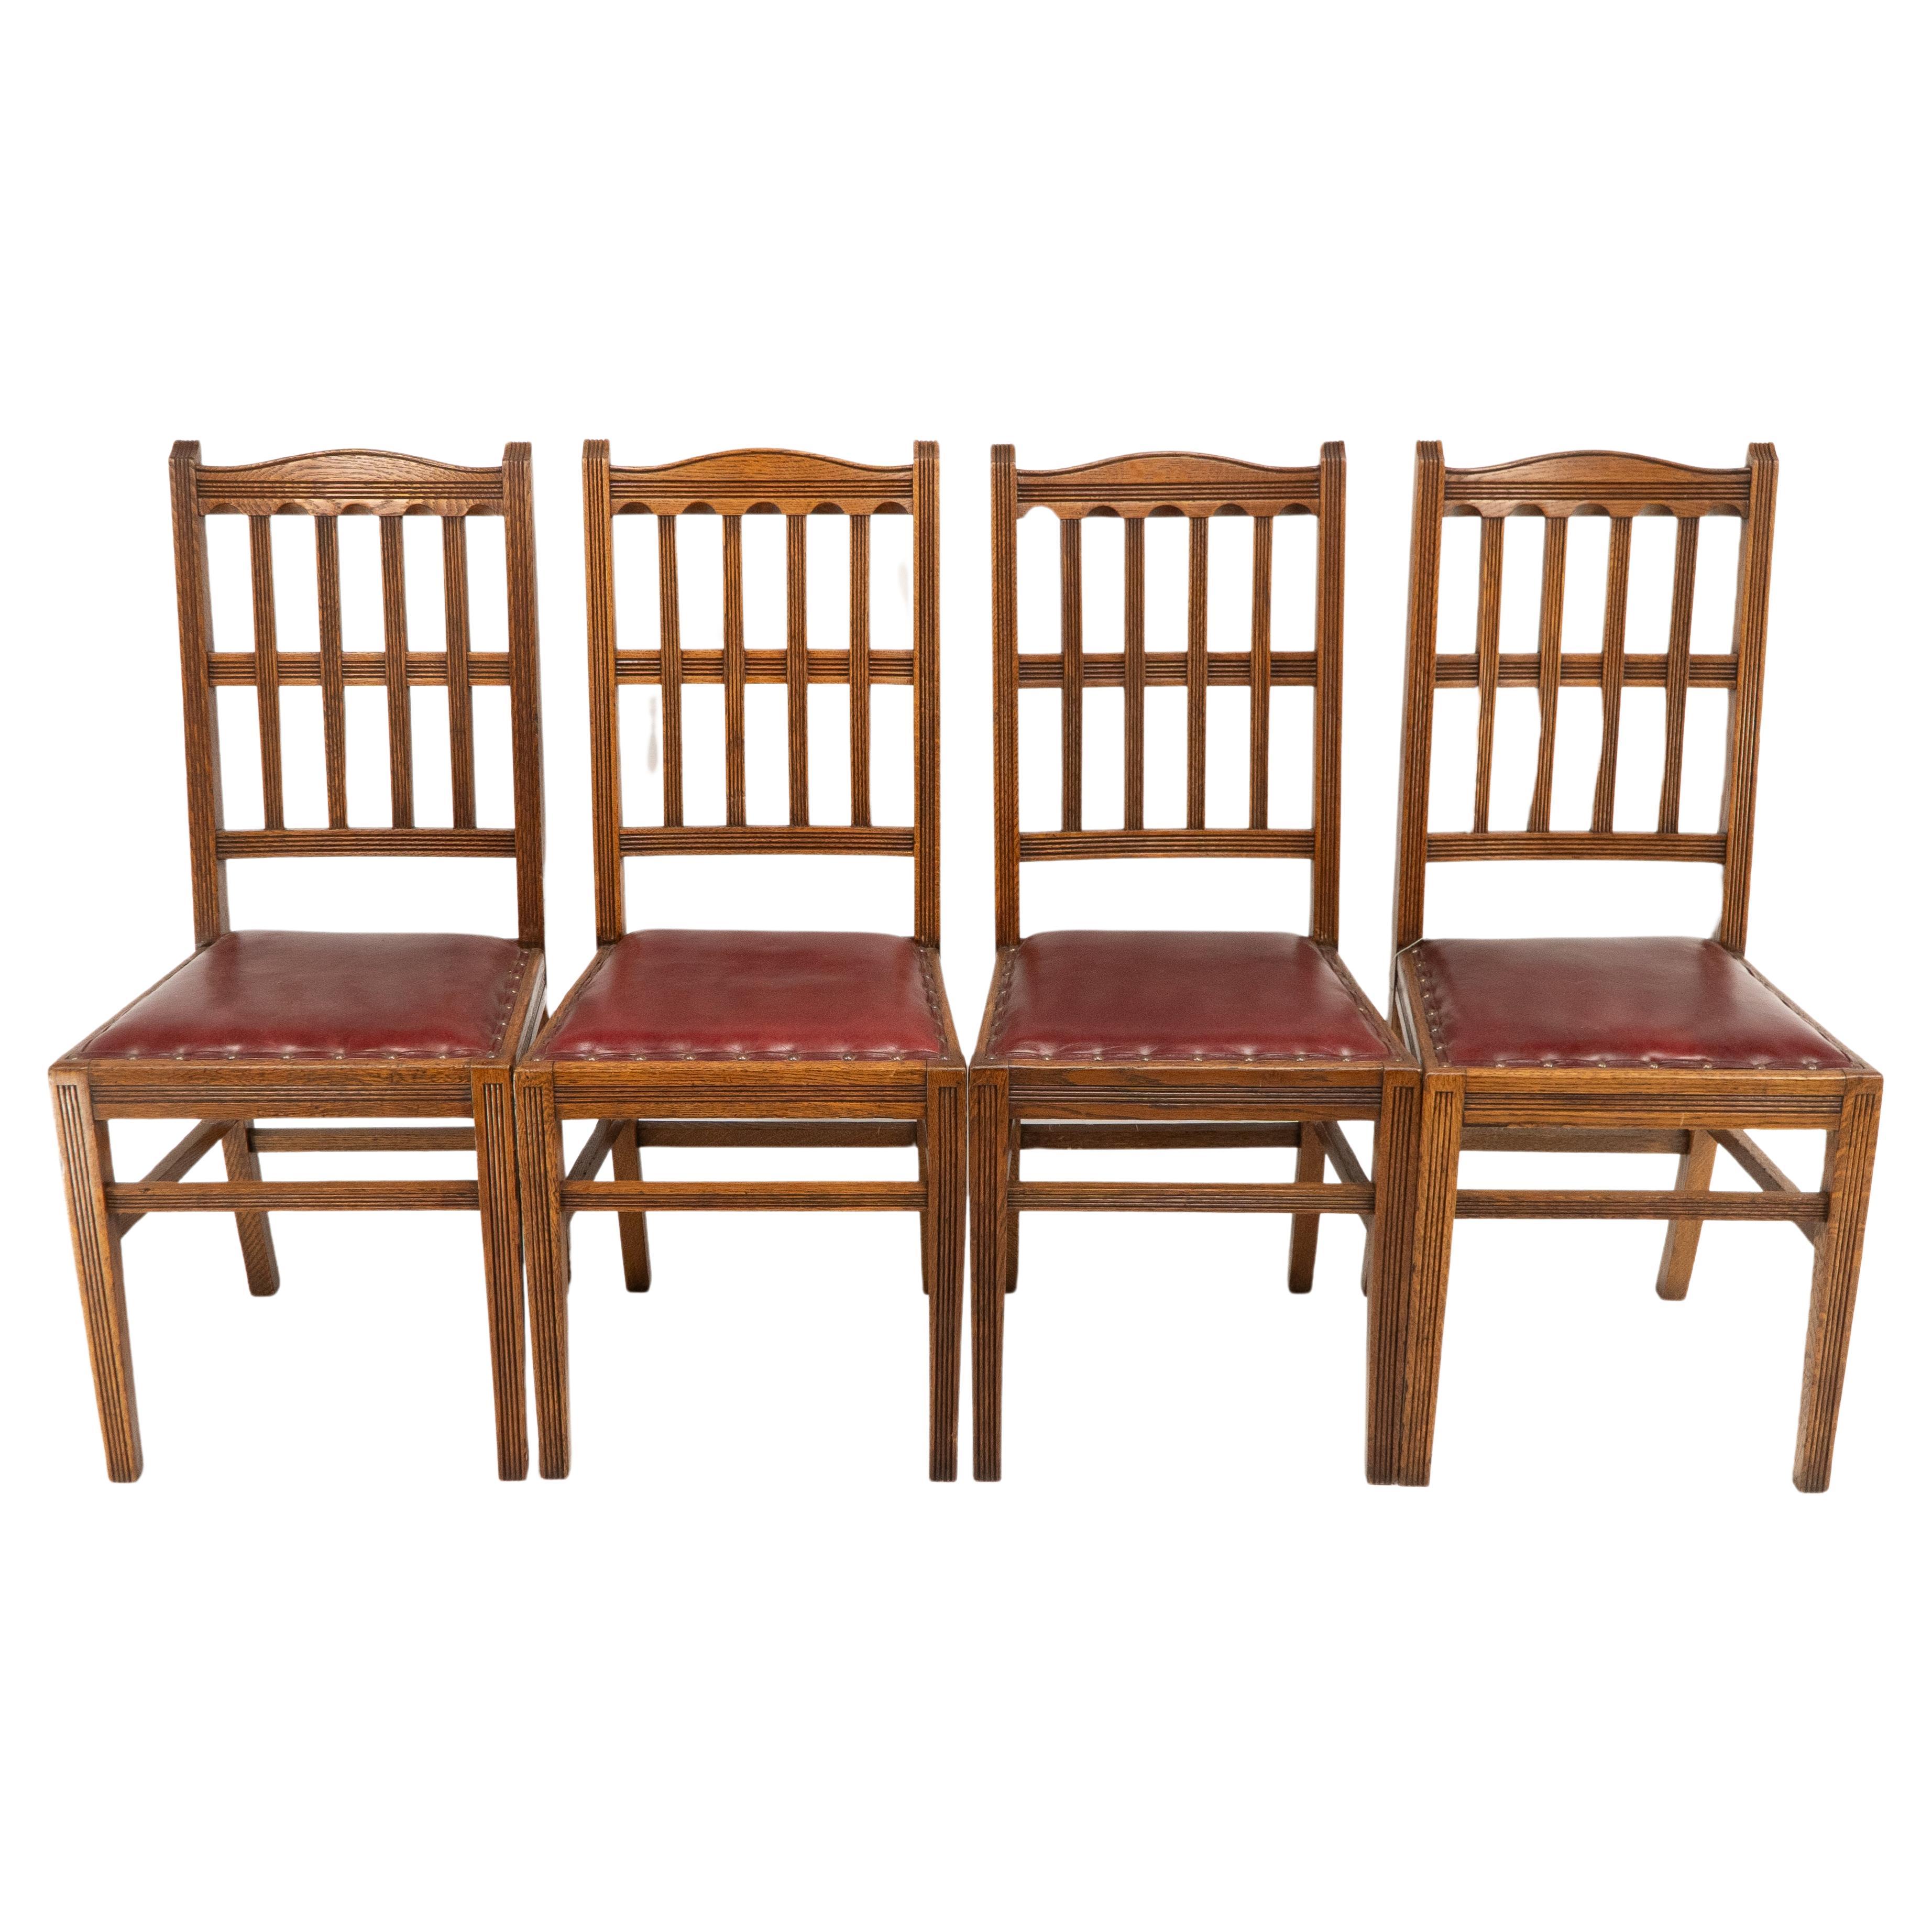 Jas Shoolbred. A set of four Aesthetic Movement lattice back oak dining chairs